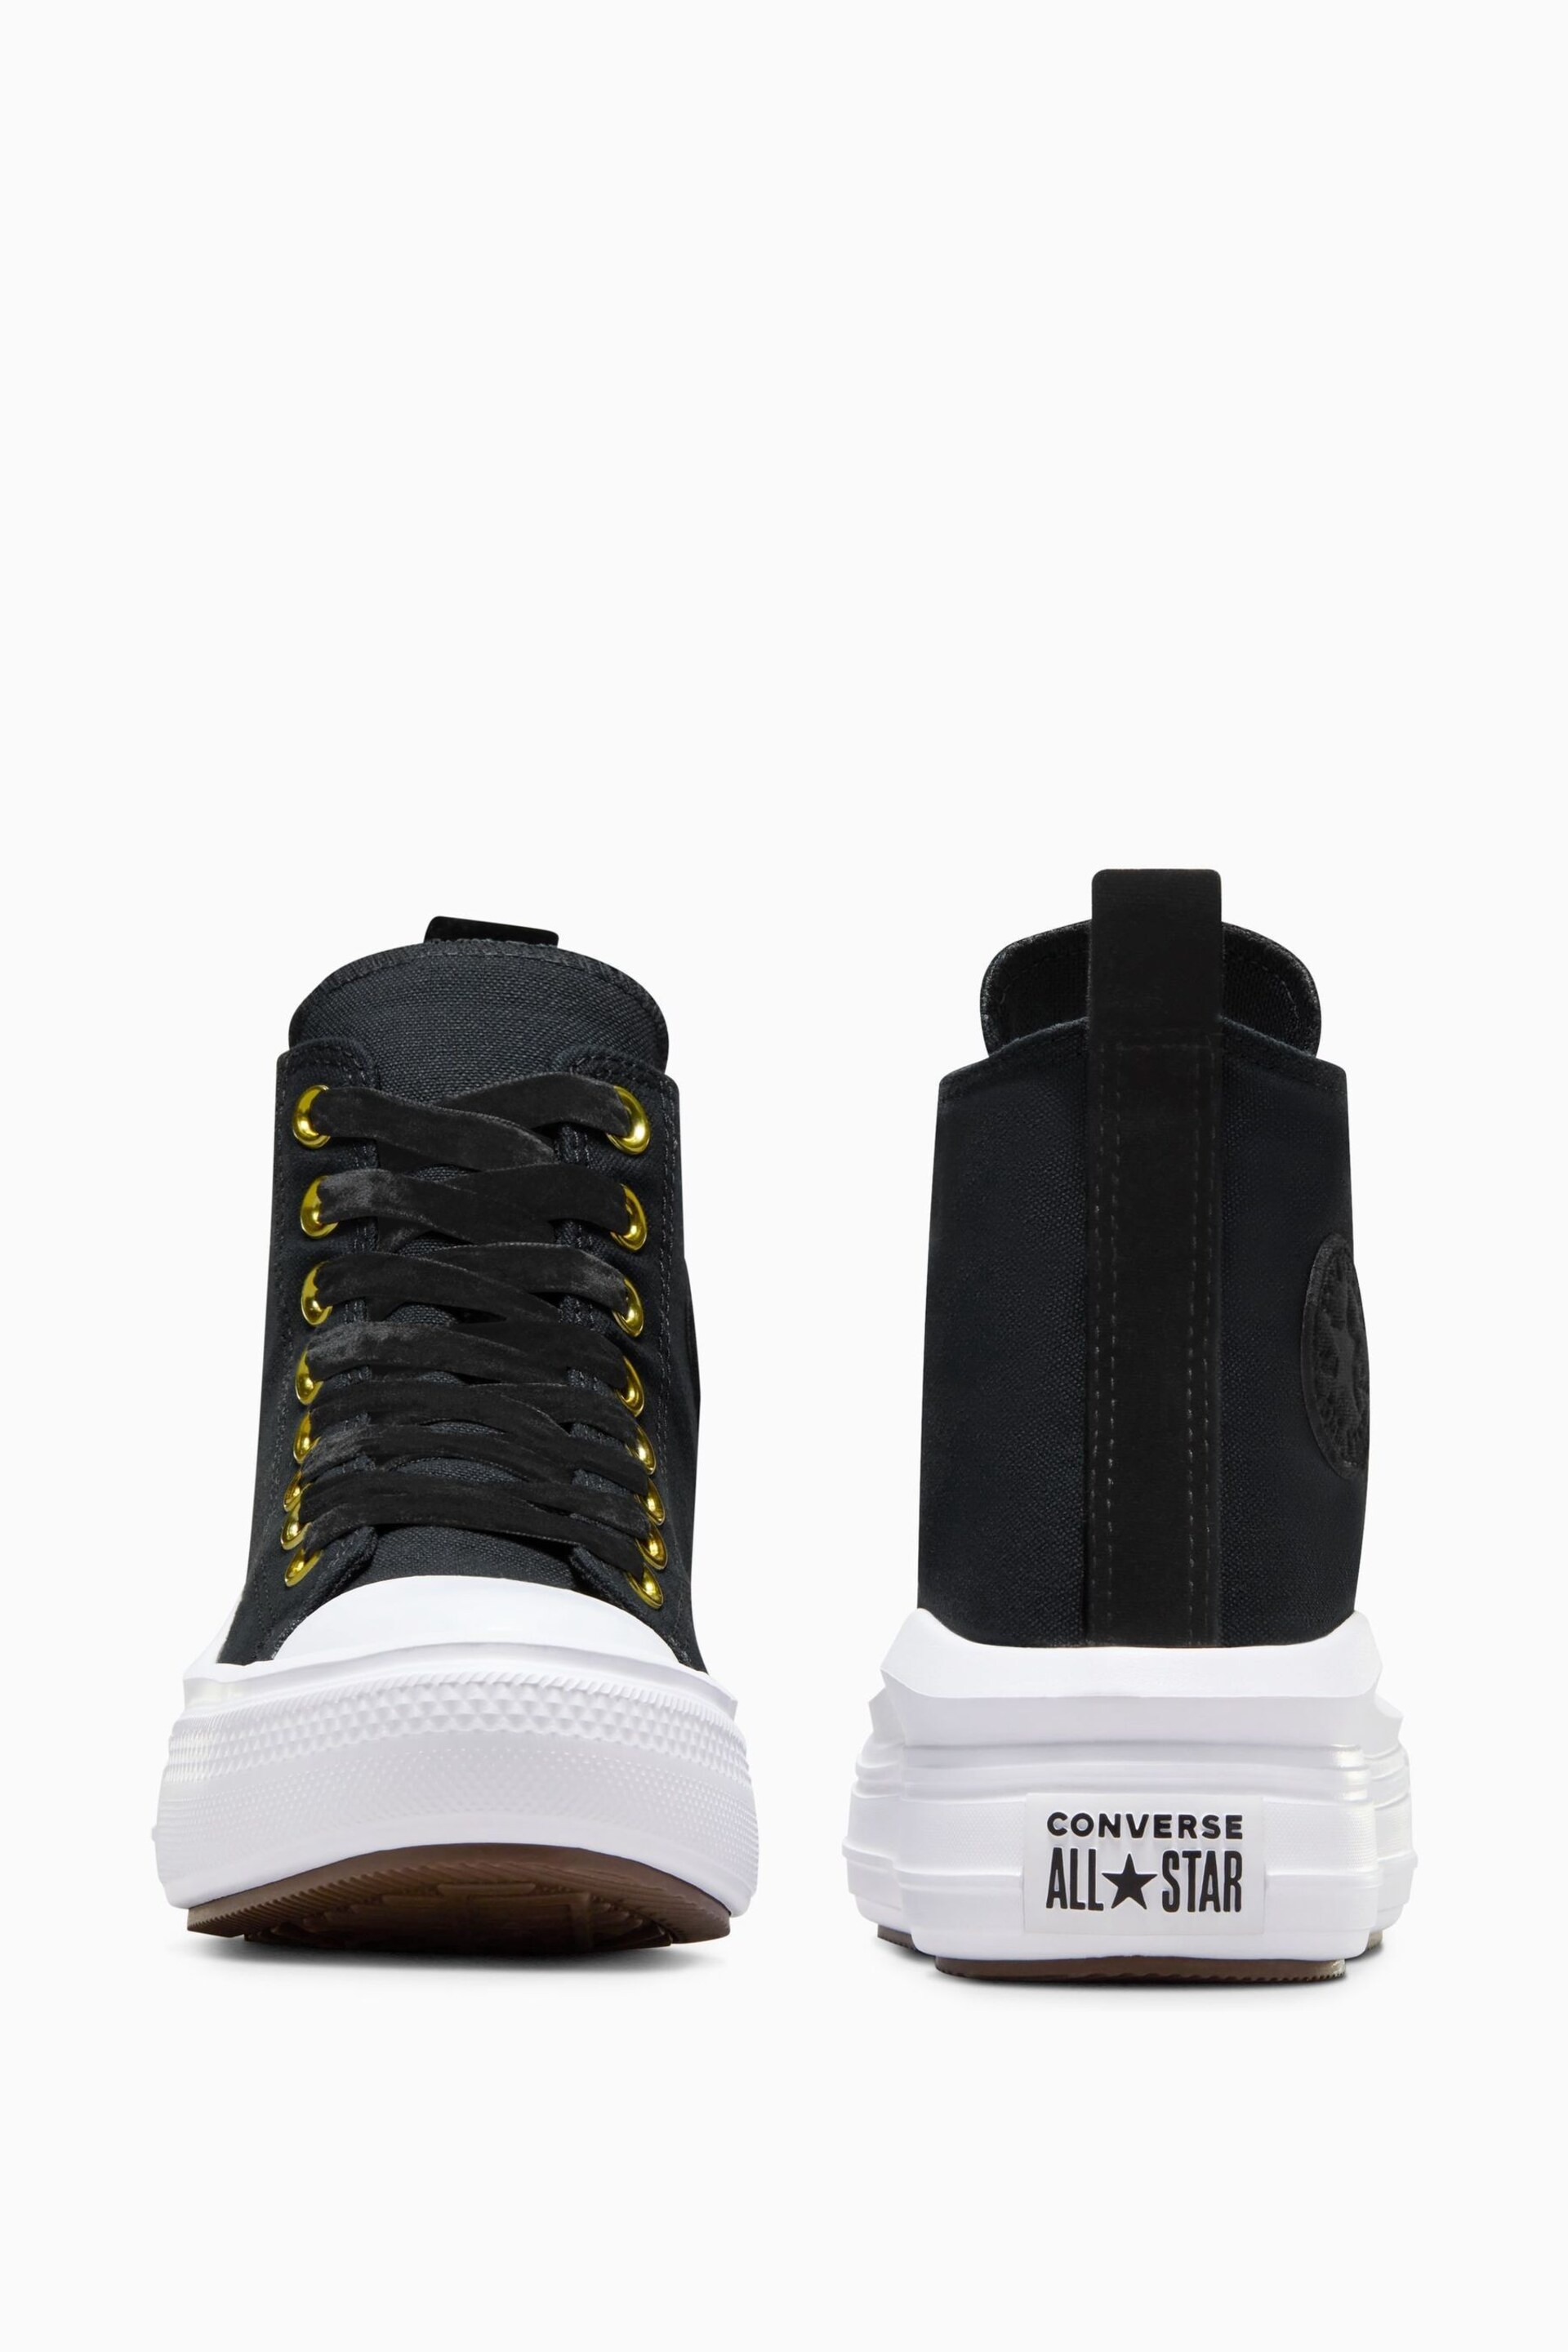 Converse Black Velvet Move Youth Trainers - Image 9 of 14